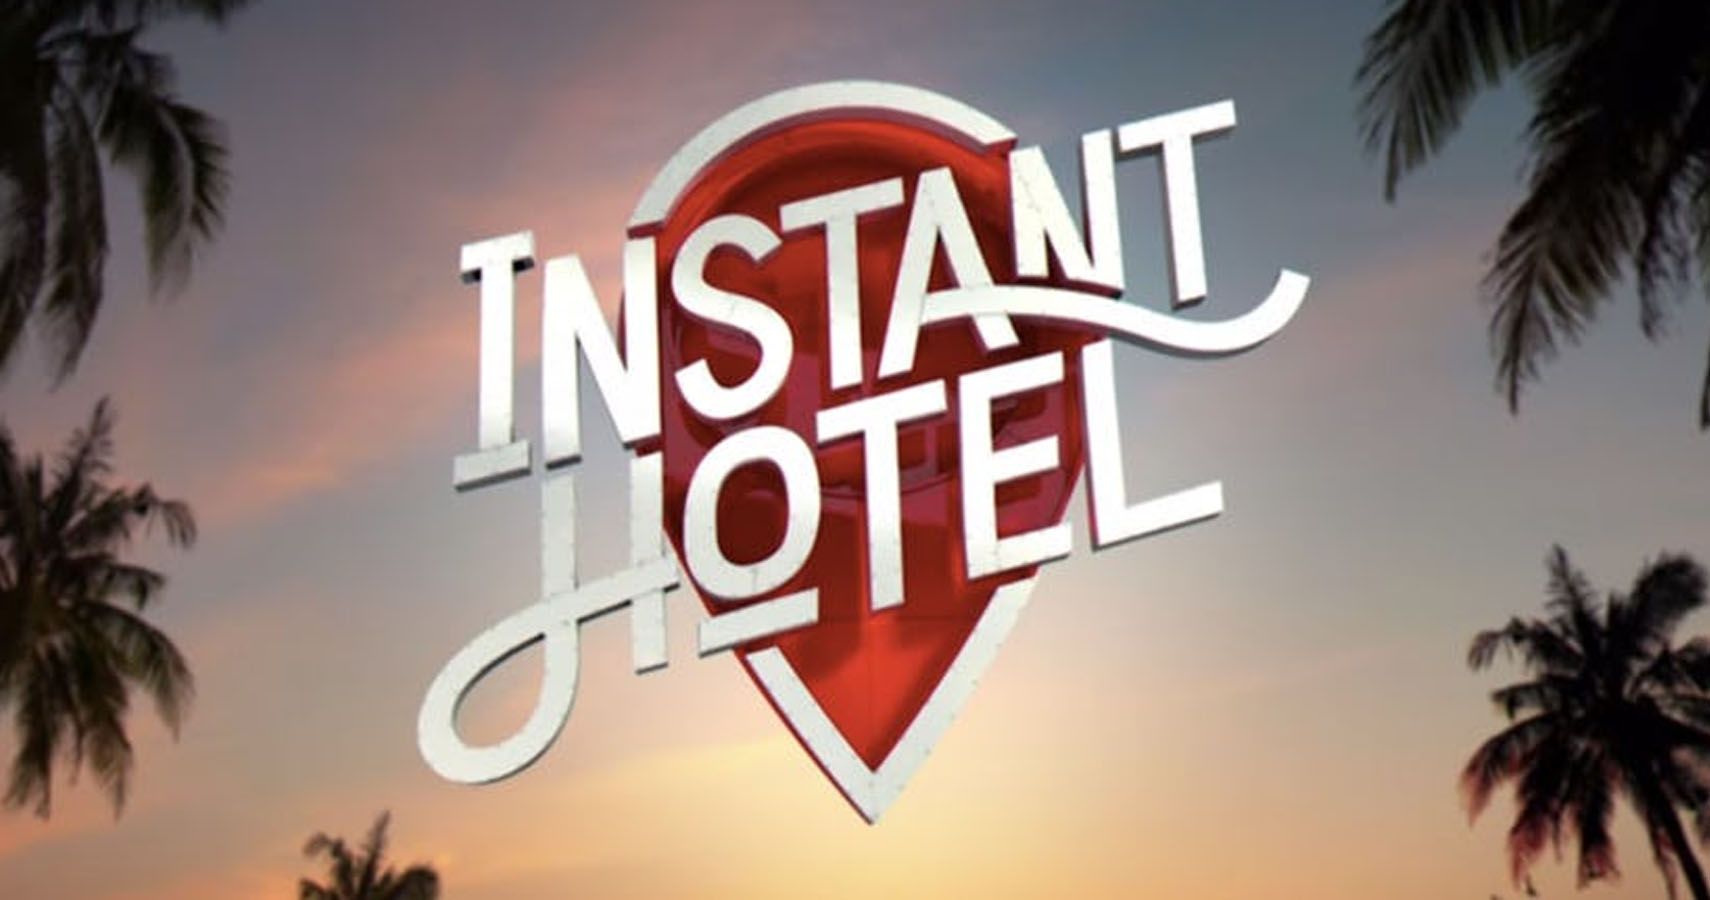 Instant Hotel All The Hotels From Season 1 & 2 Ranked